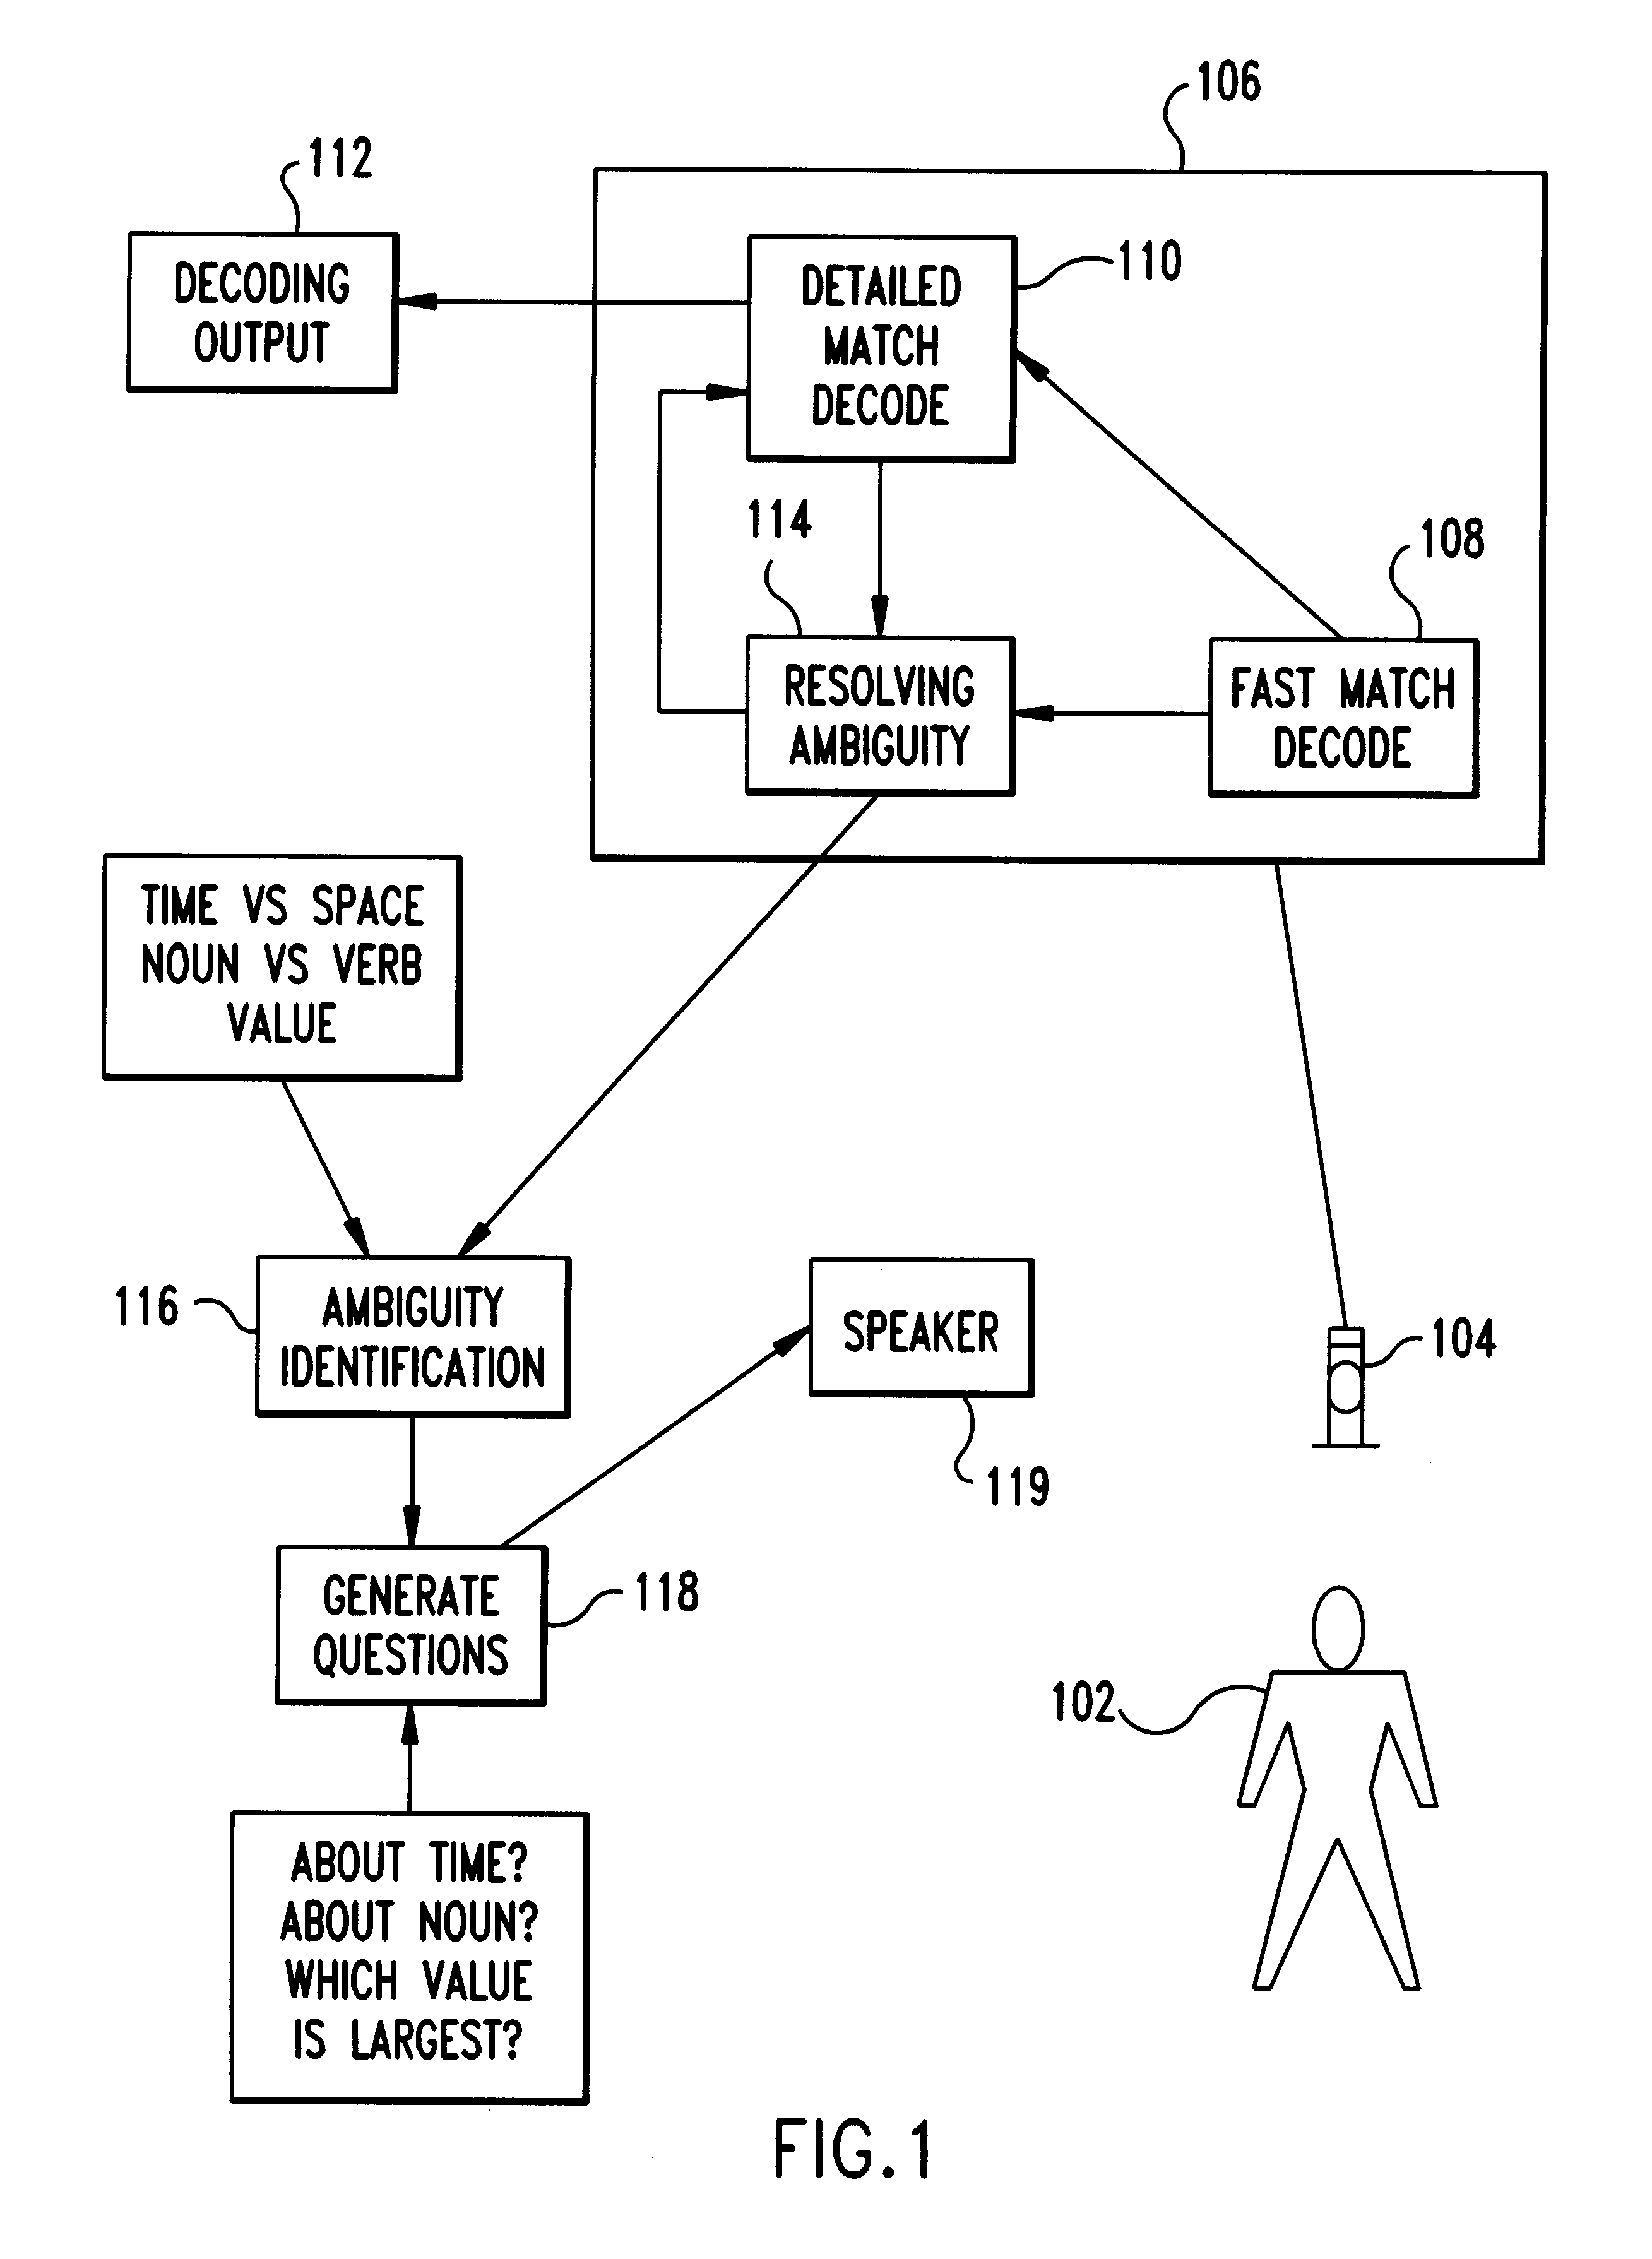 System and method for resolving decoding ambiguity via dialog